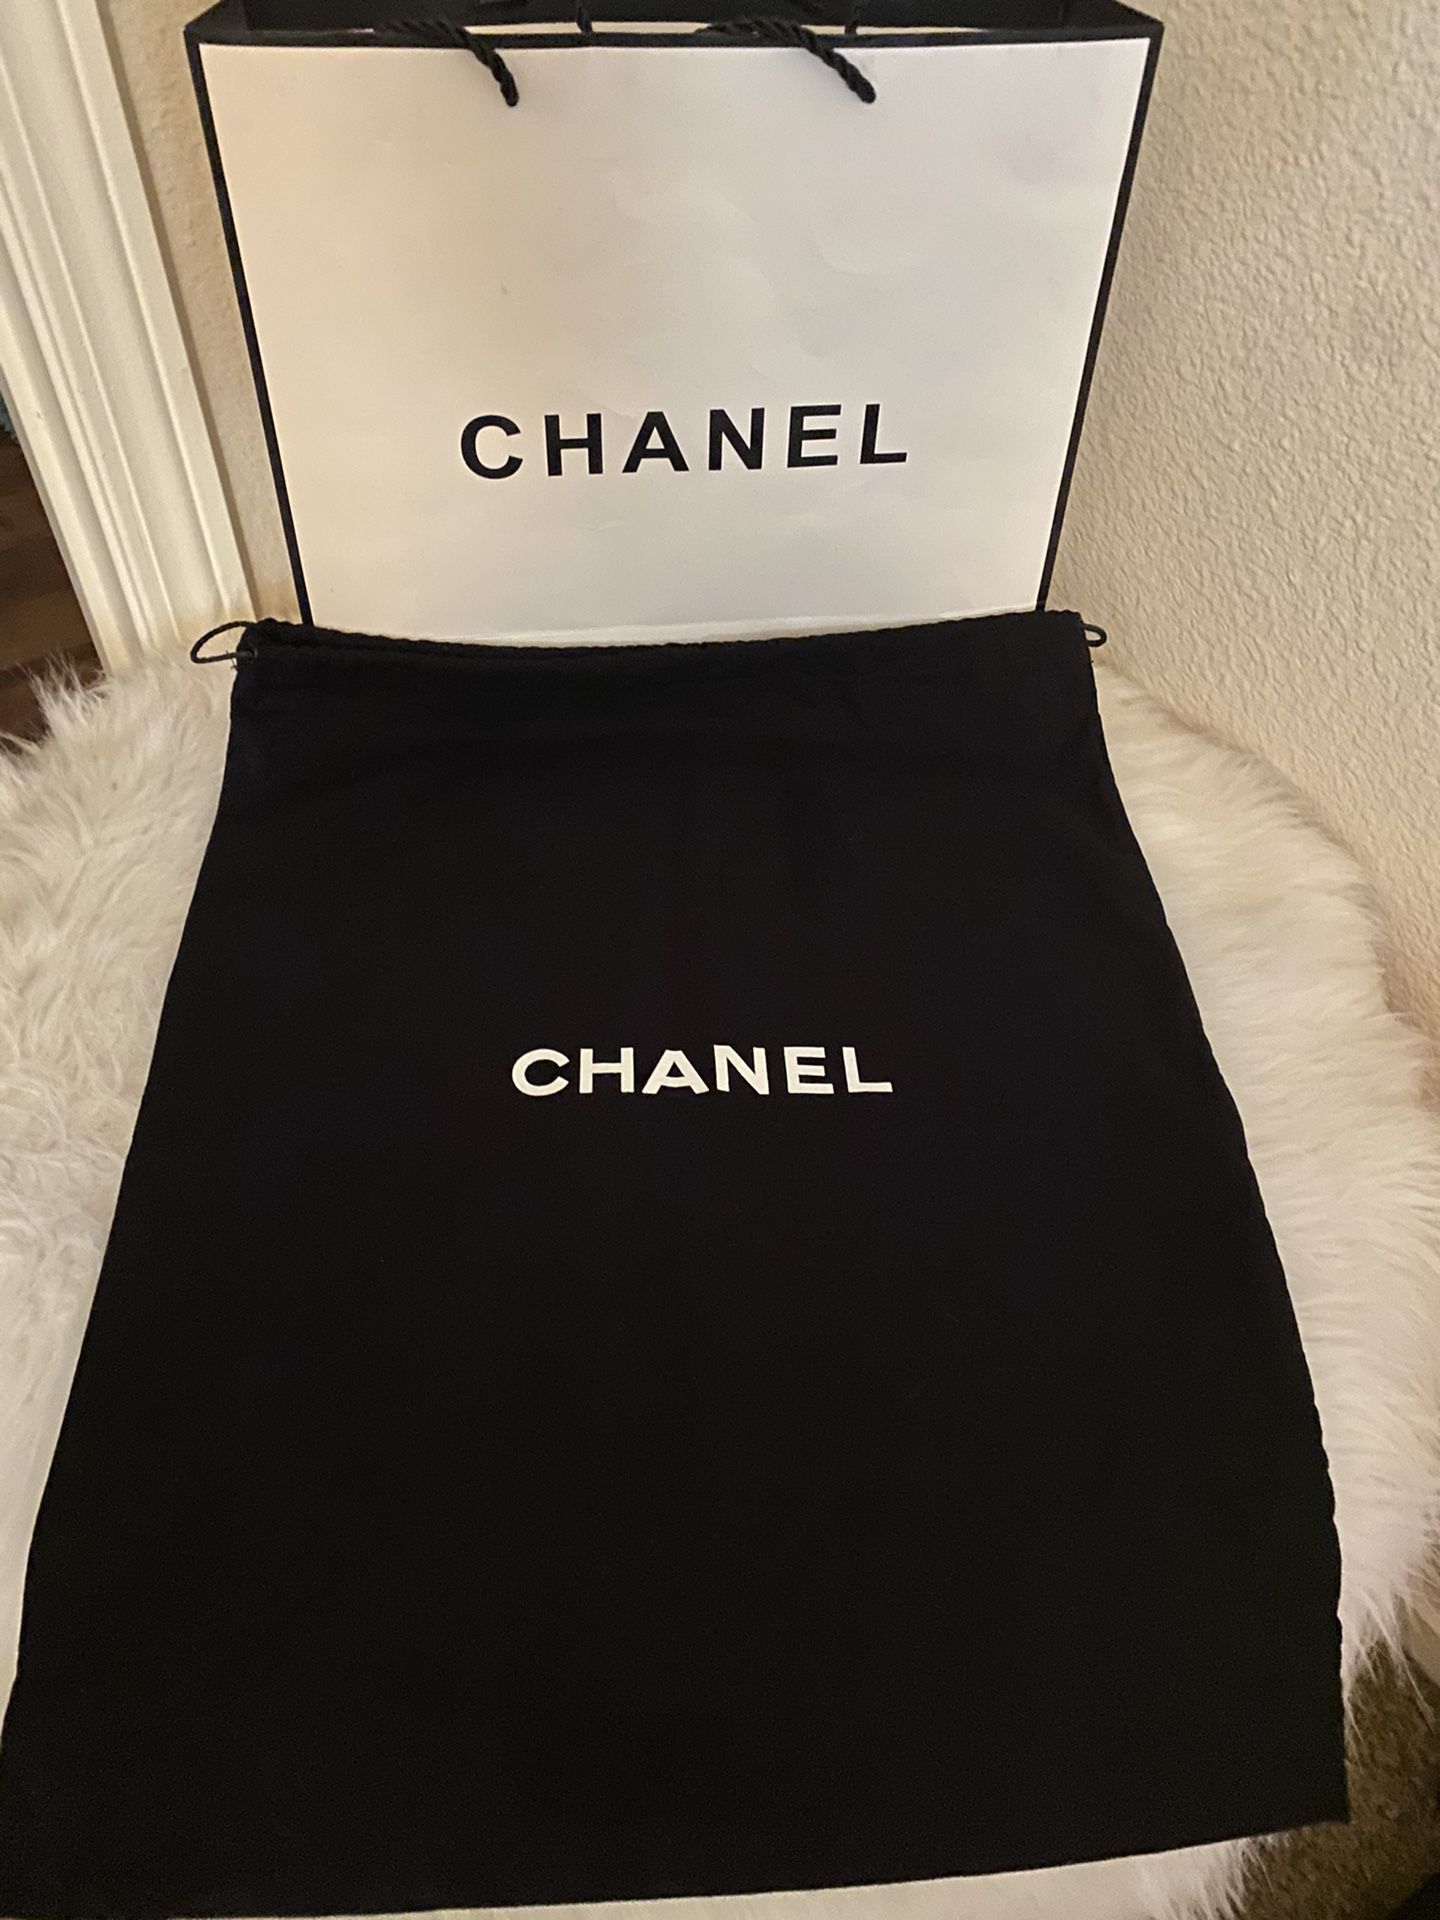 Chanel black large Dust bag! Authentic & new!